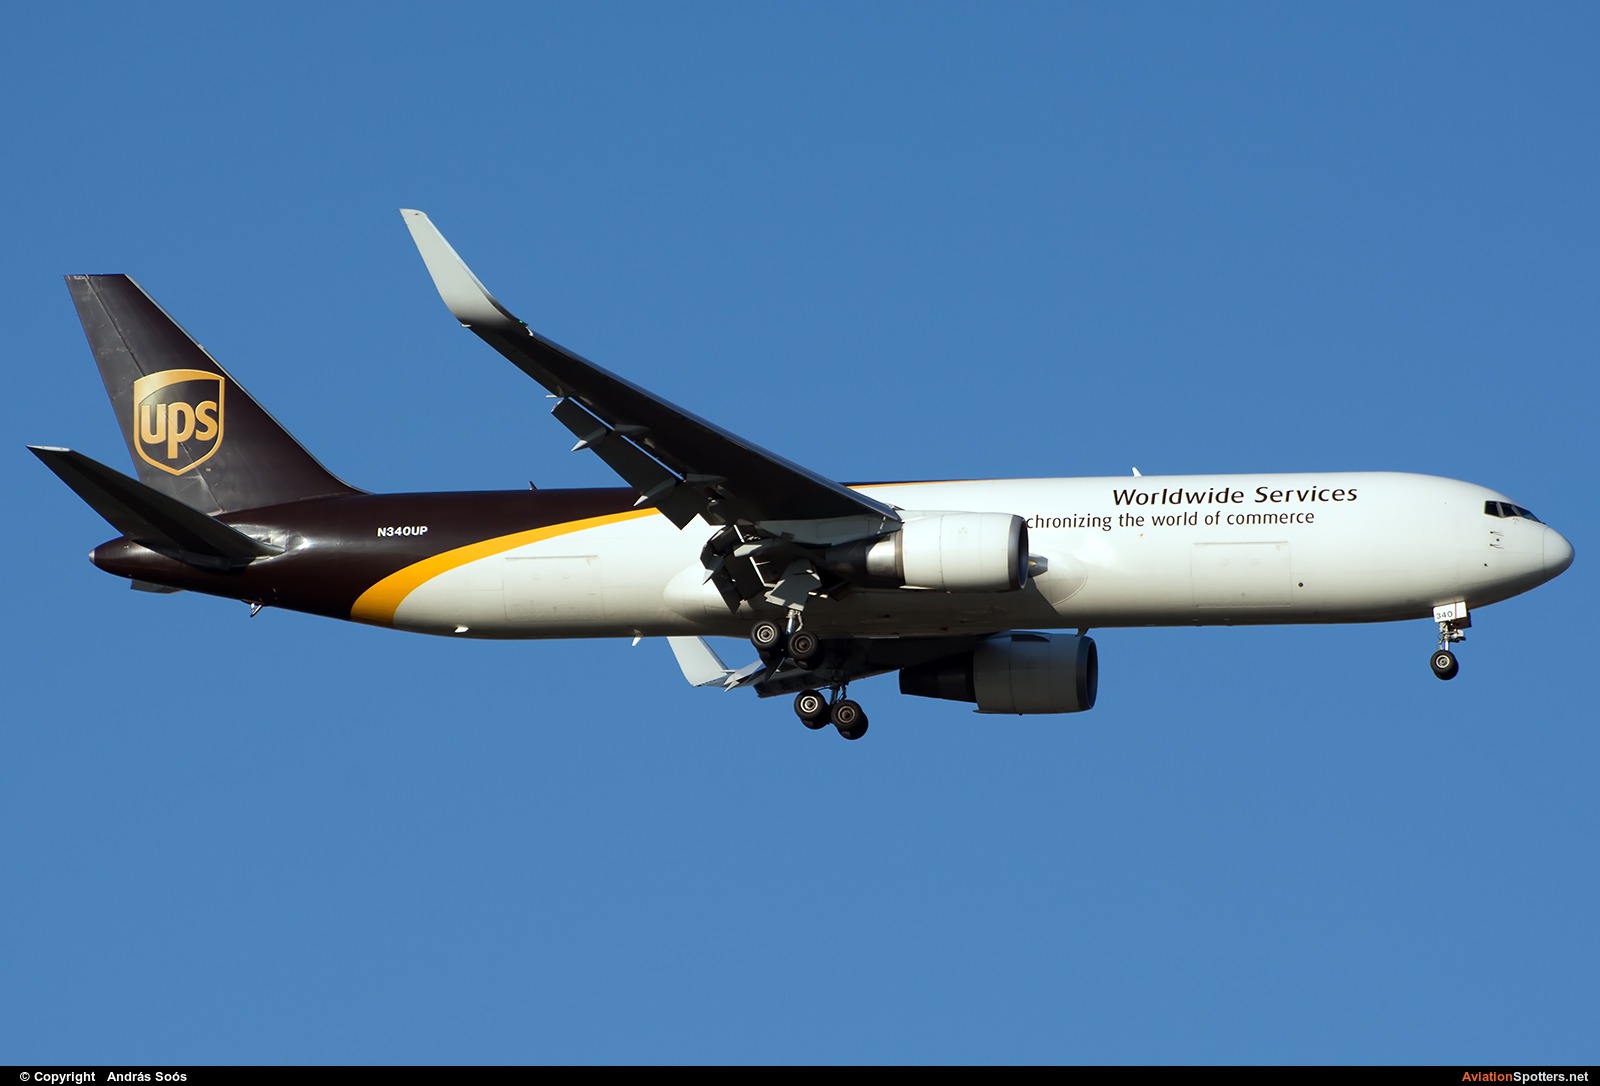 UPS - United Parcel Service  -  767-300F  (N340UP) By András Soós (sas1965)